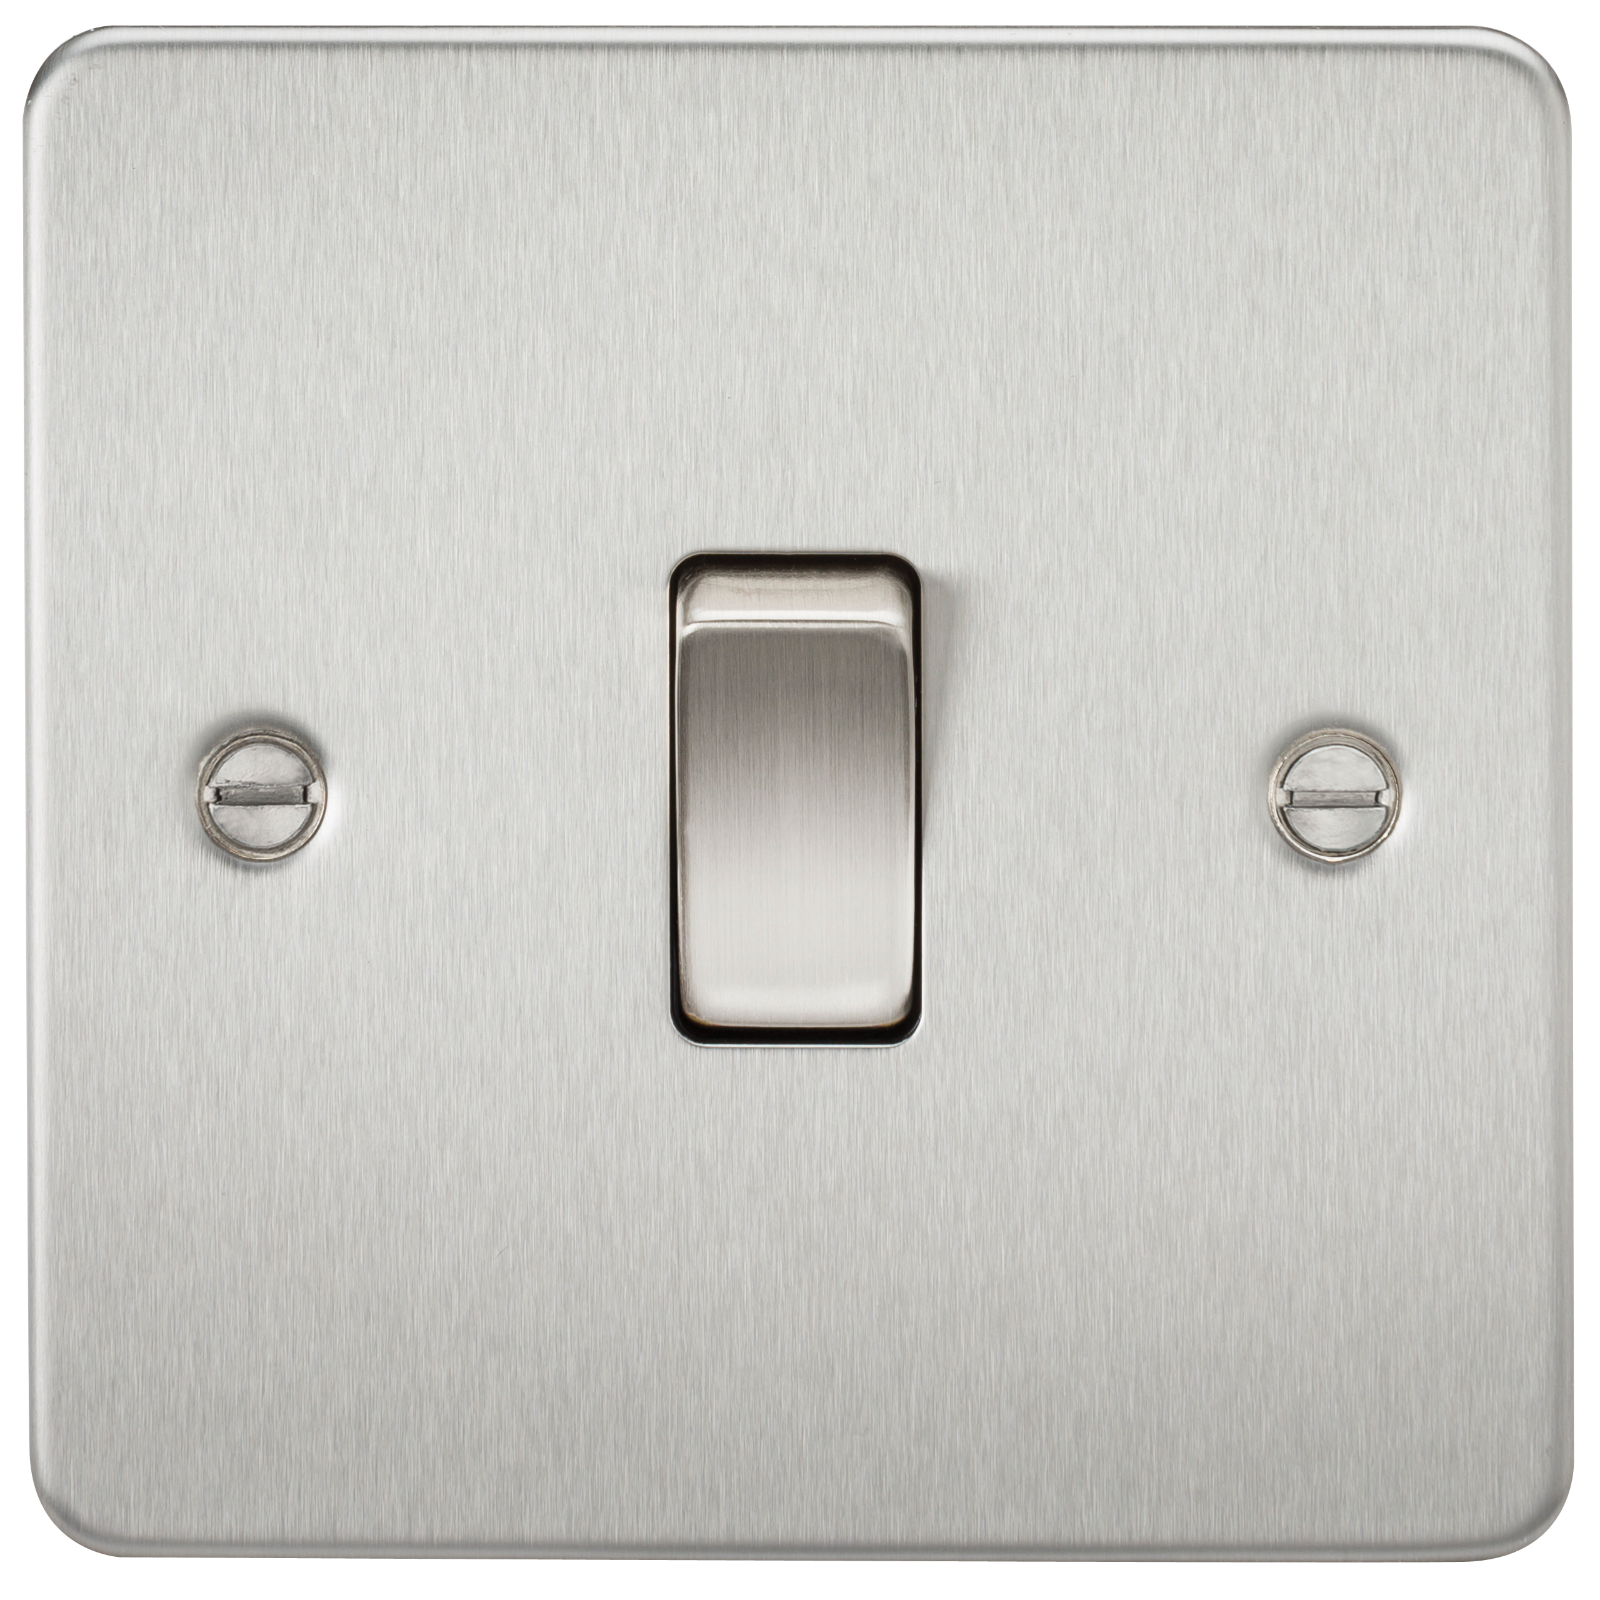 Flat Plate 10A 1G 2 Way Switch - Brushed Chrome - FP2000BC 